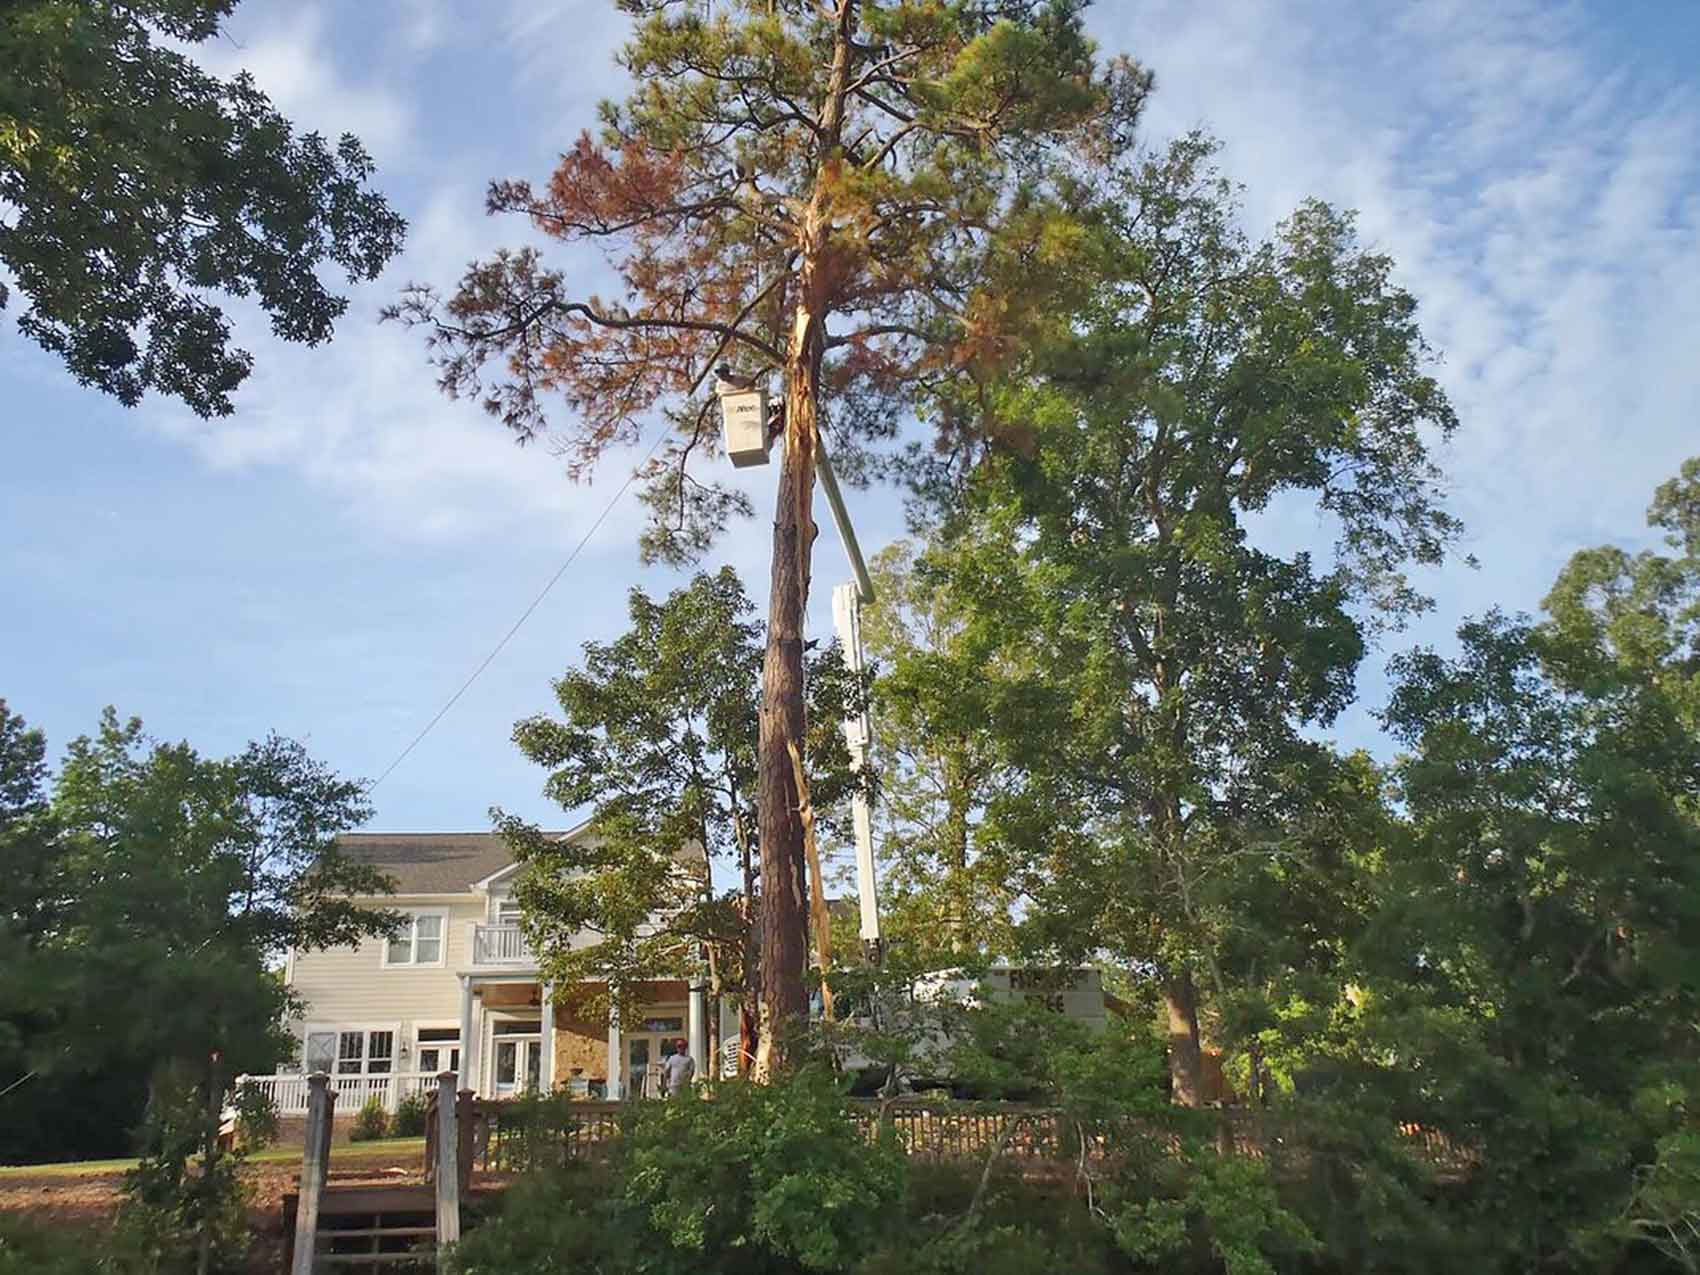 Whether you need tree trimming, tree removal, or want to plant a new tree, our certified arborists a Fitness Tree Wilmington (910)343-8016